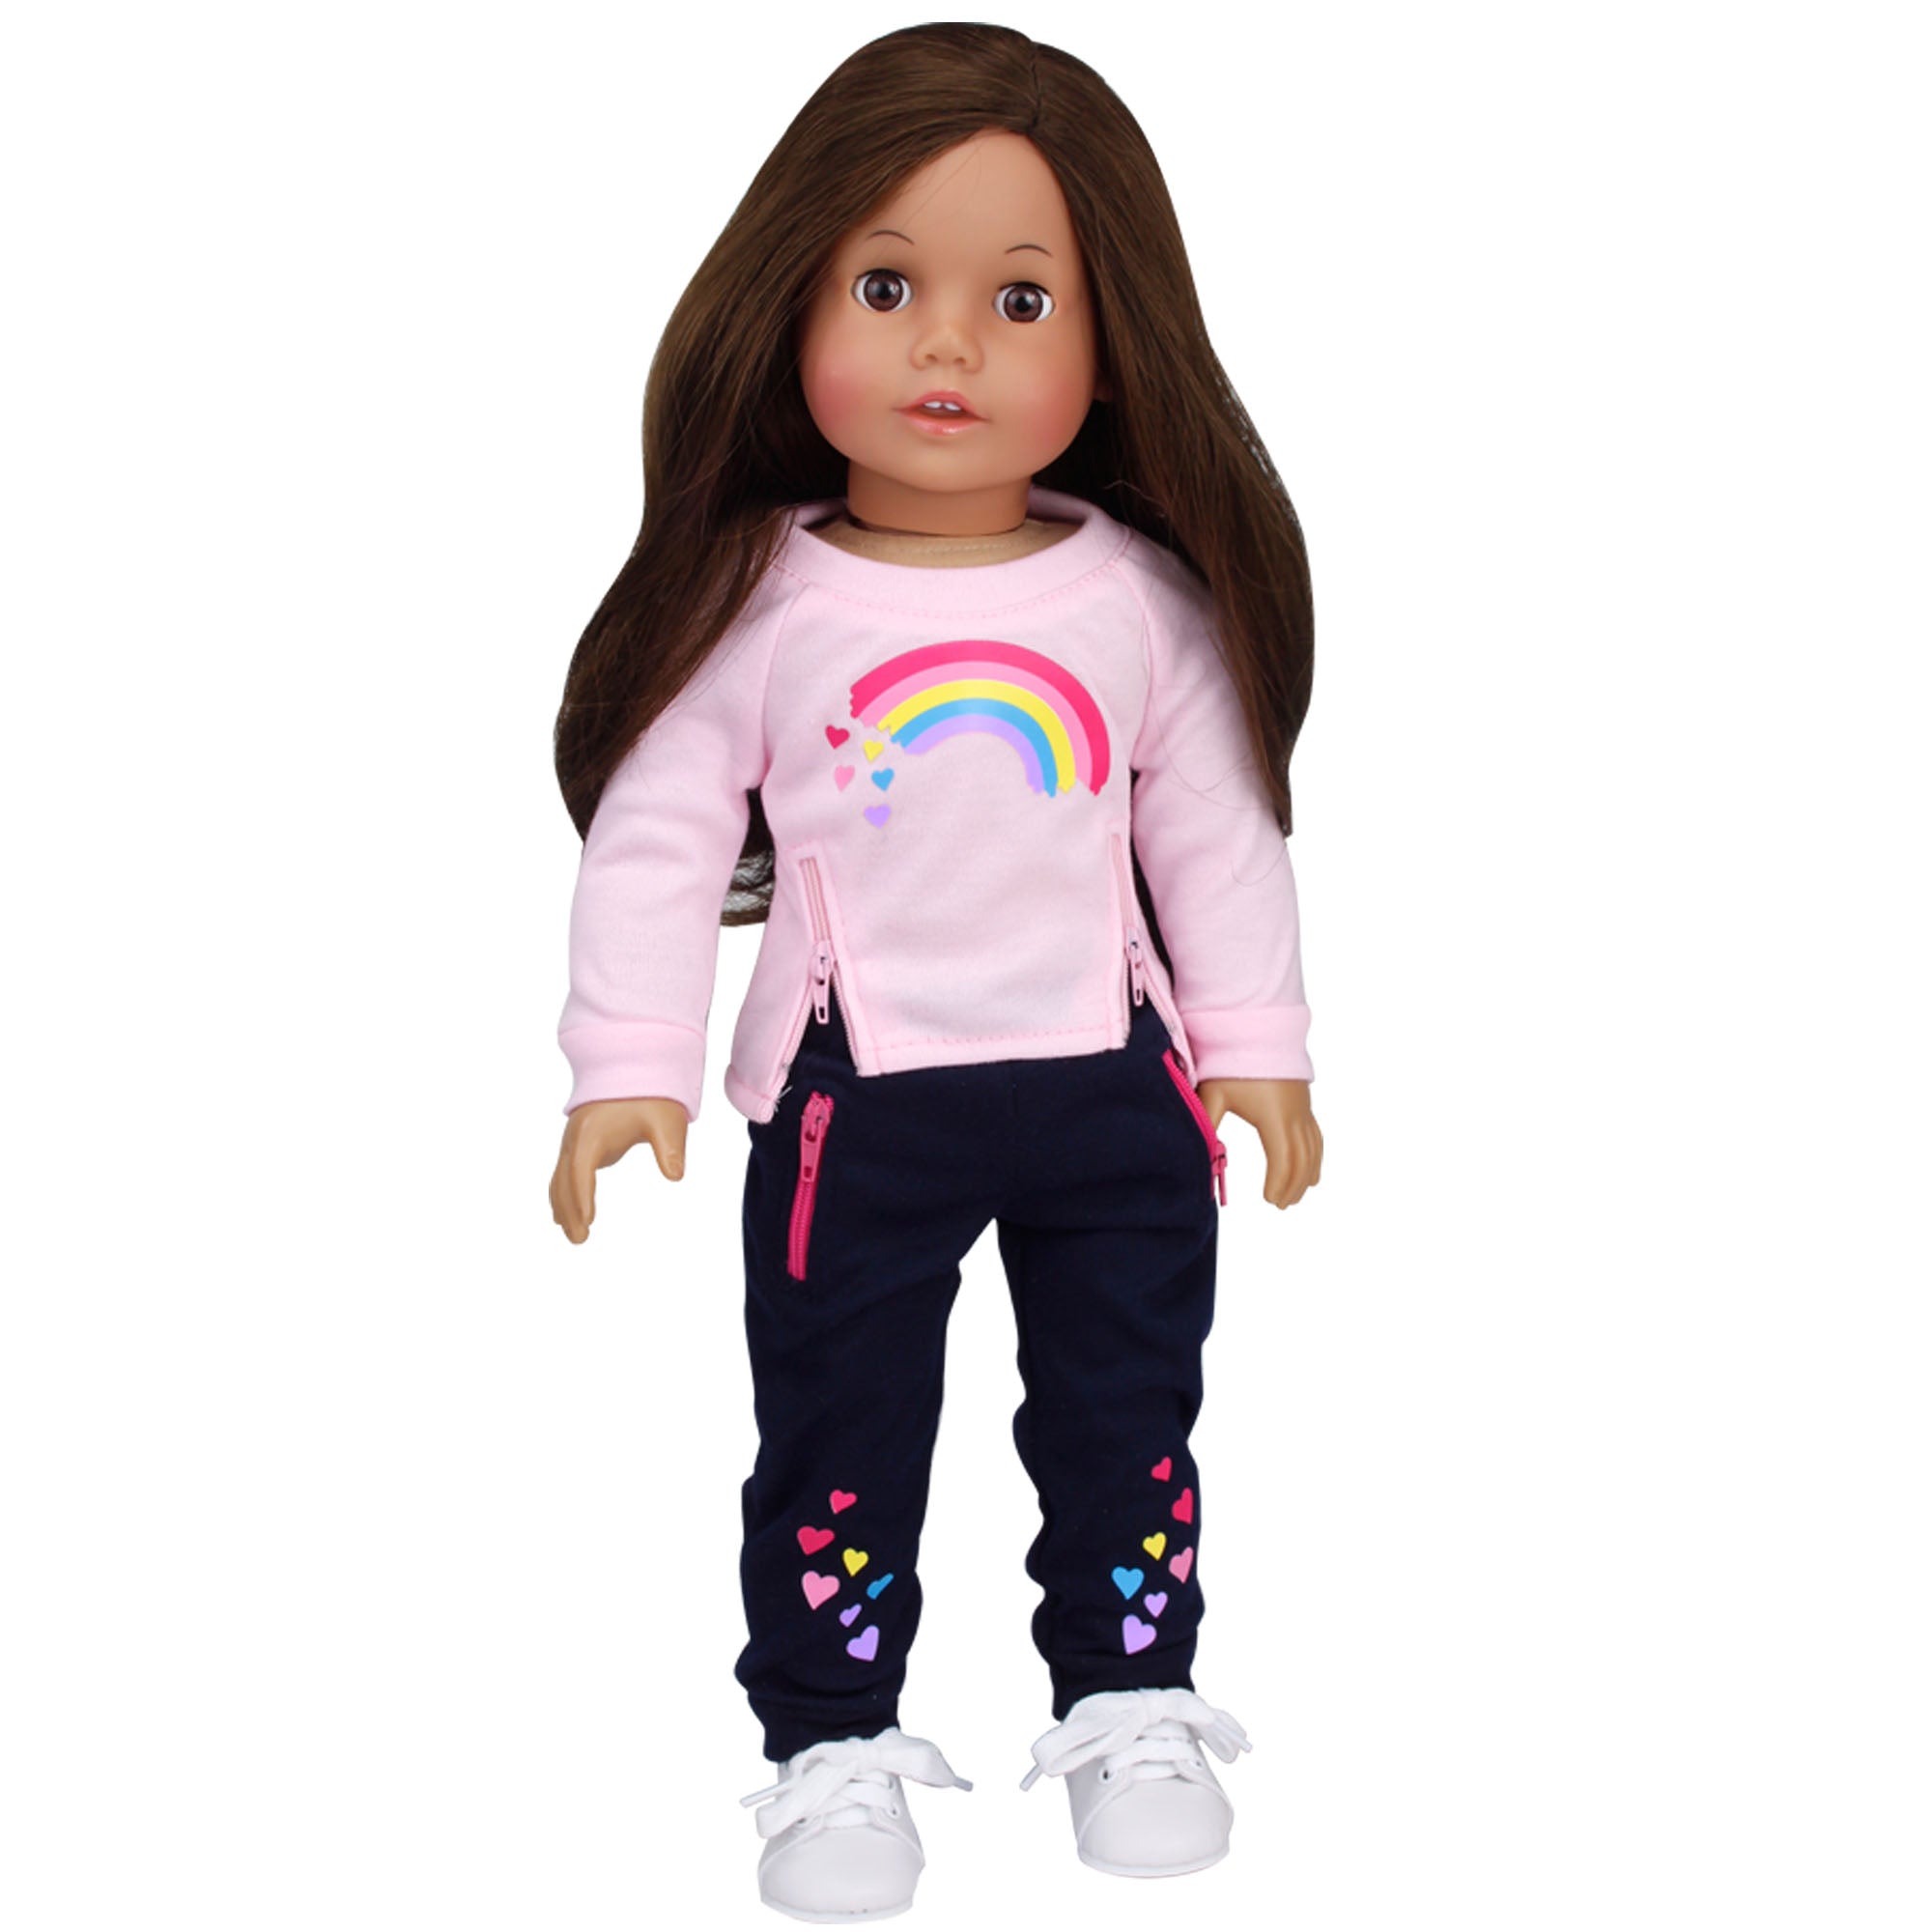 Sophia’s Athletic Graphic Rainbow Sweatshirt & Navy Heart Zip Pocket Joggers Complete Sweatsuit Outfit Set for 18” Dolls, Light Pink